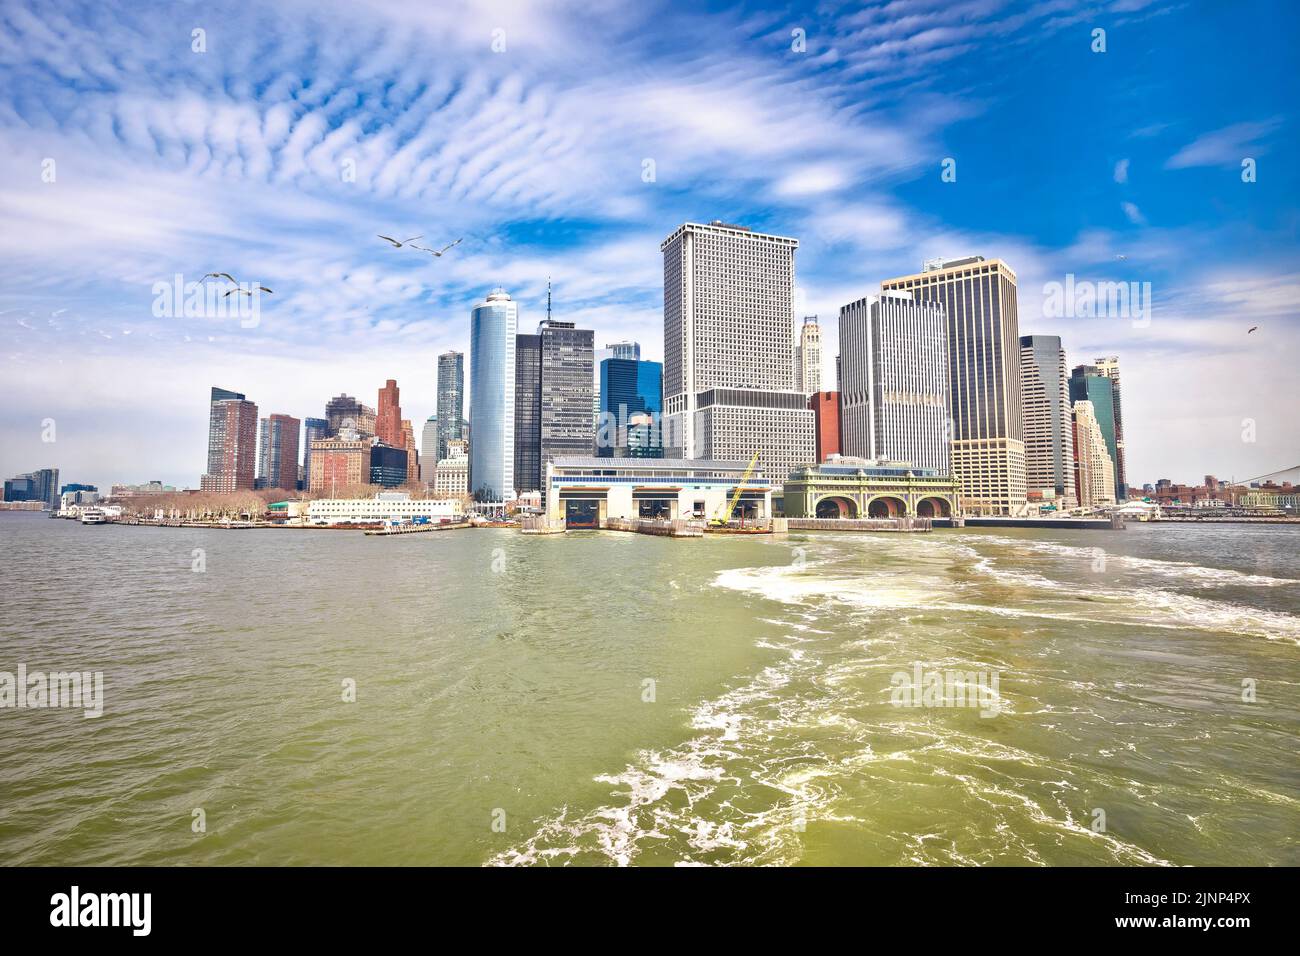 New York City downtown skyline view, United States of America Stock Photo